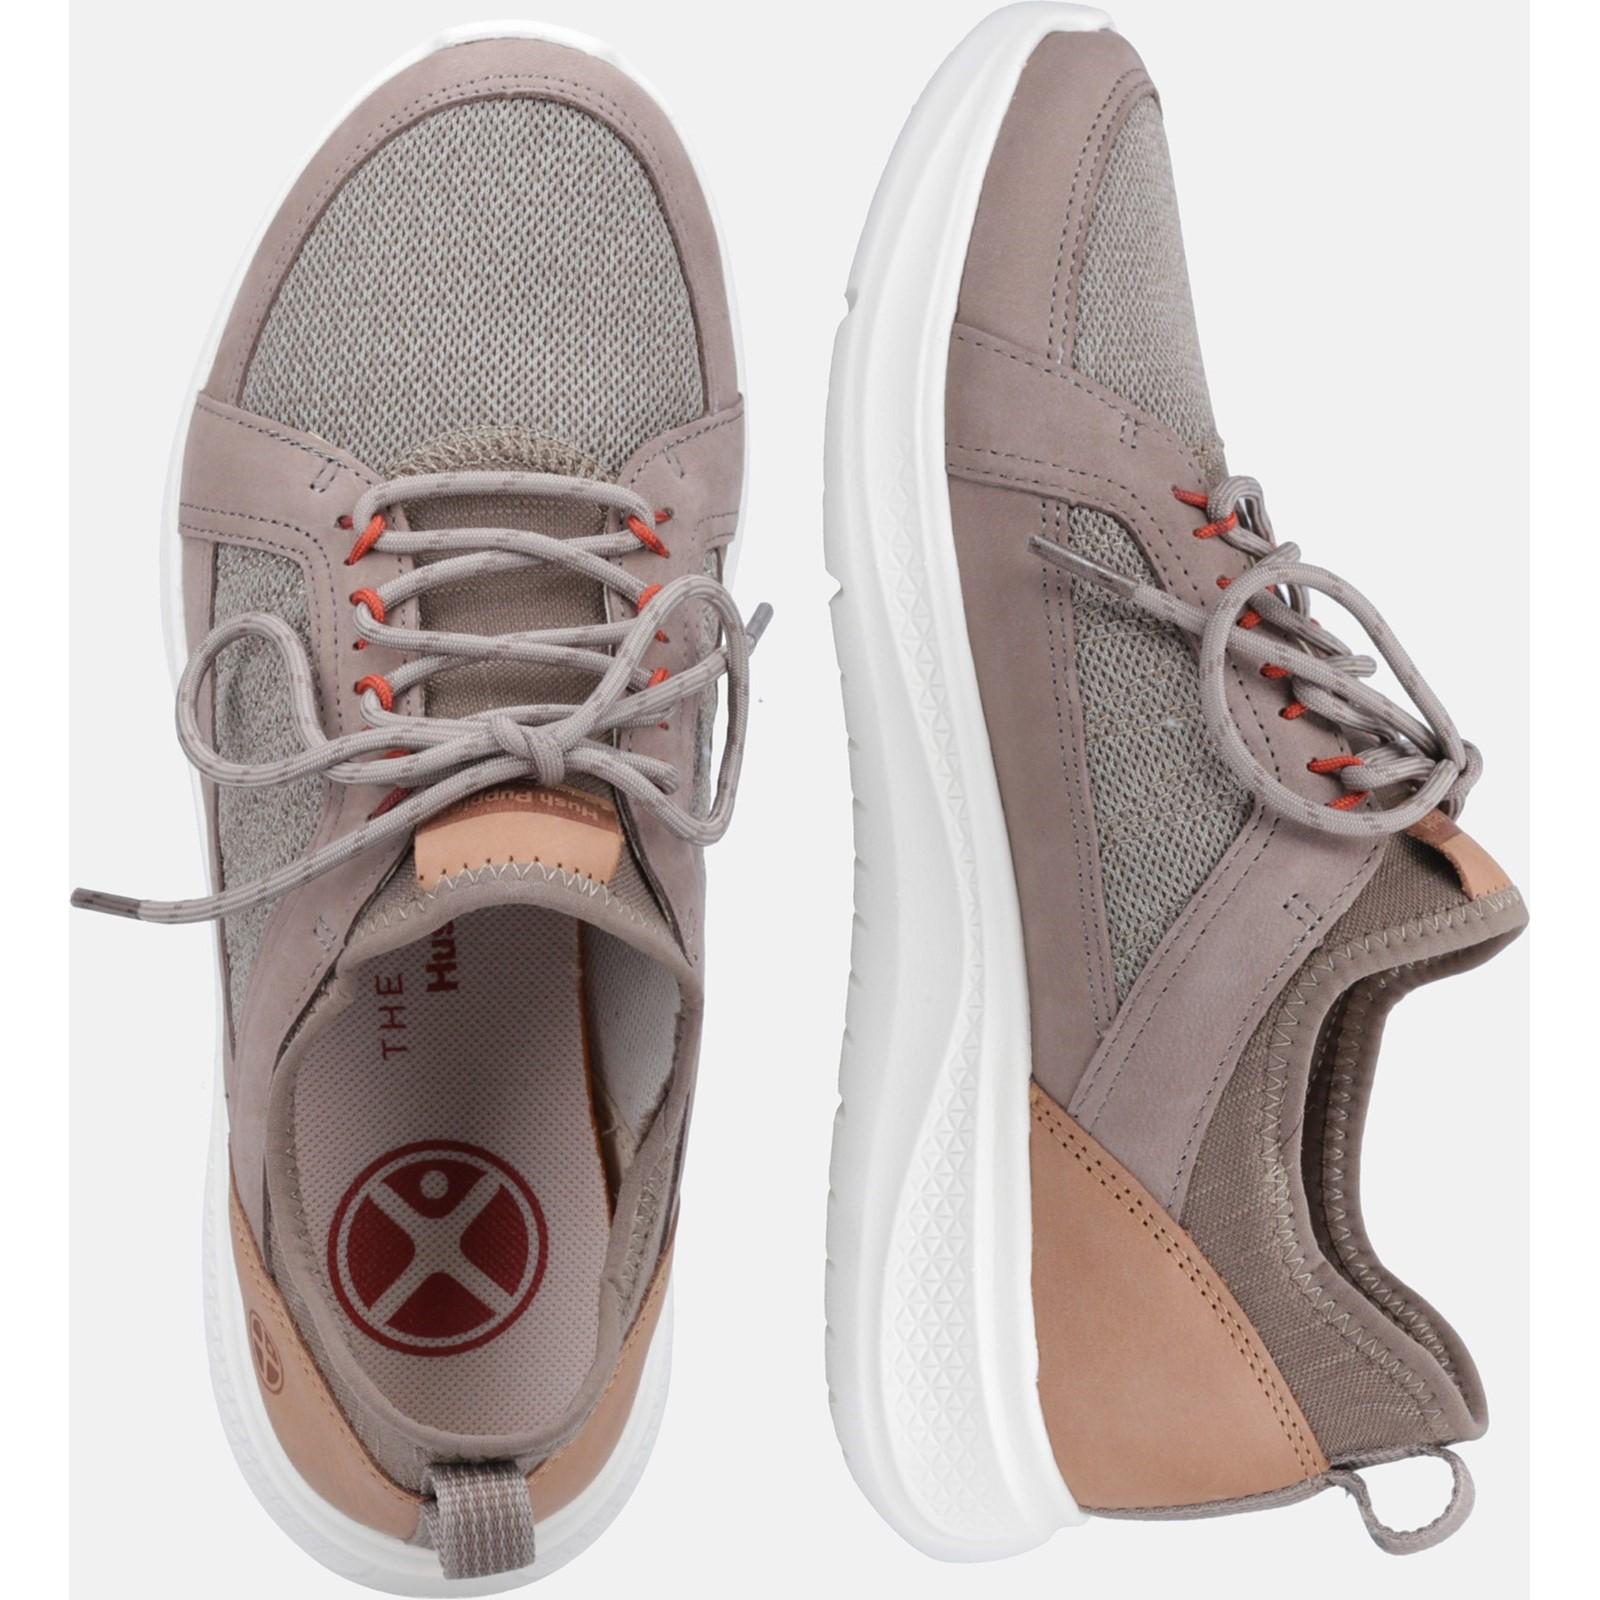 Hush Puppies Elevate Sneaker Trainers